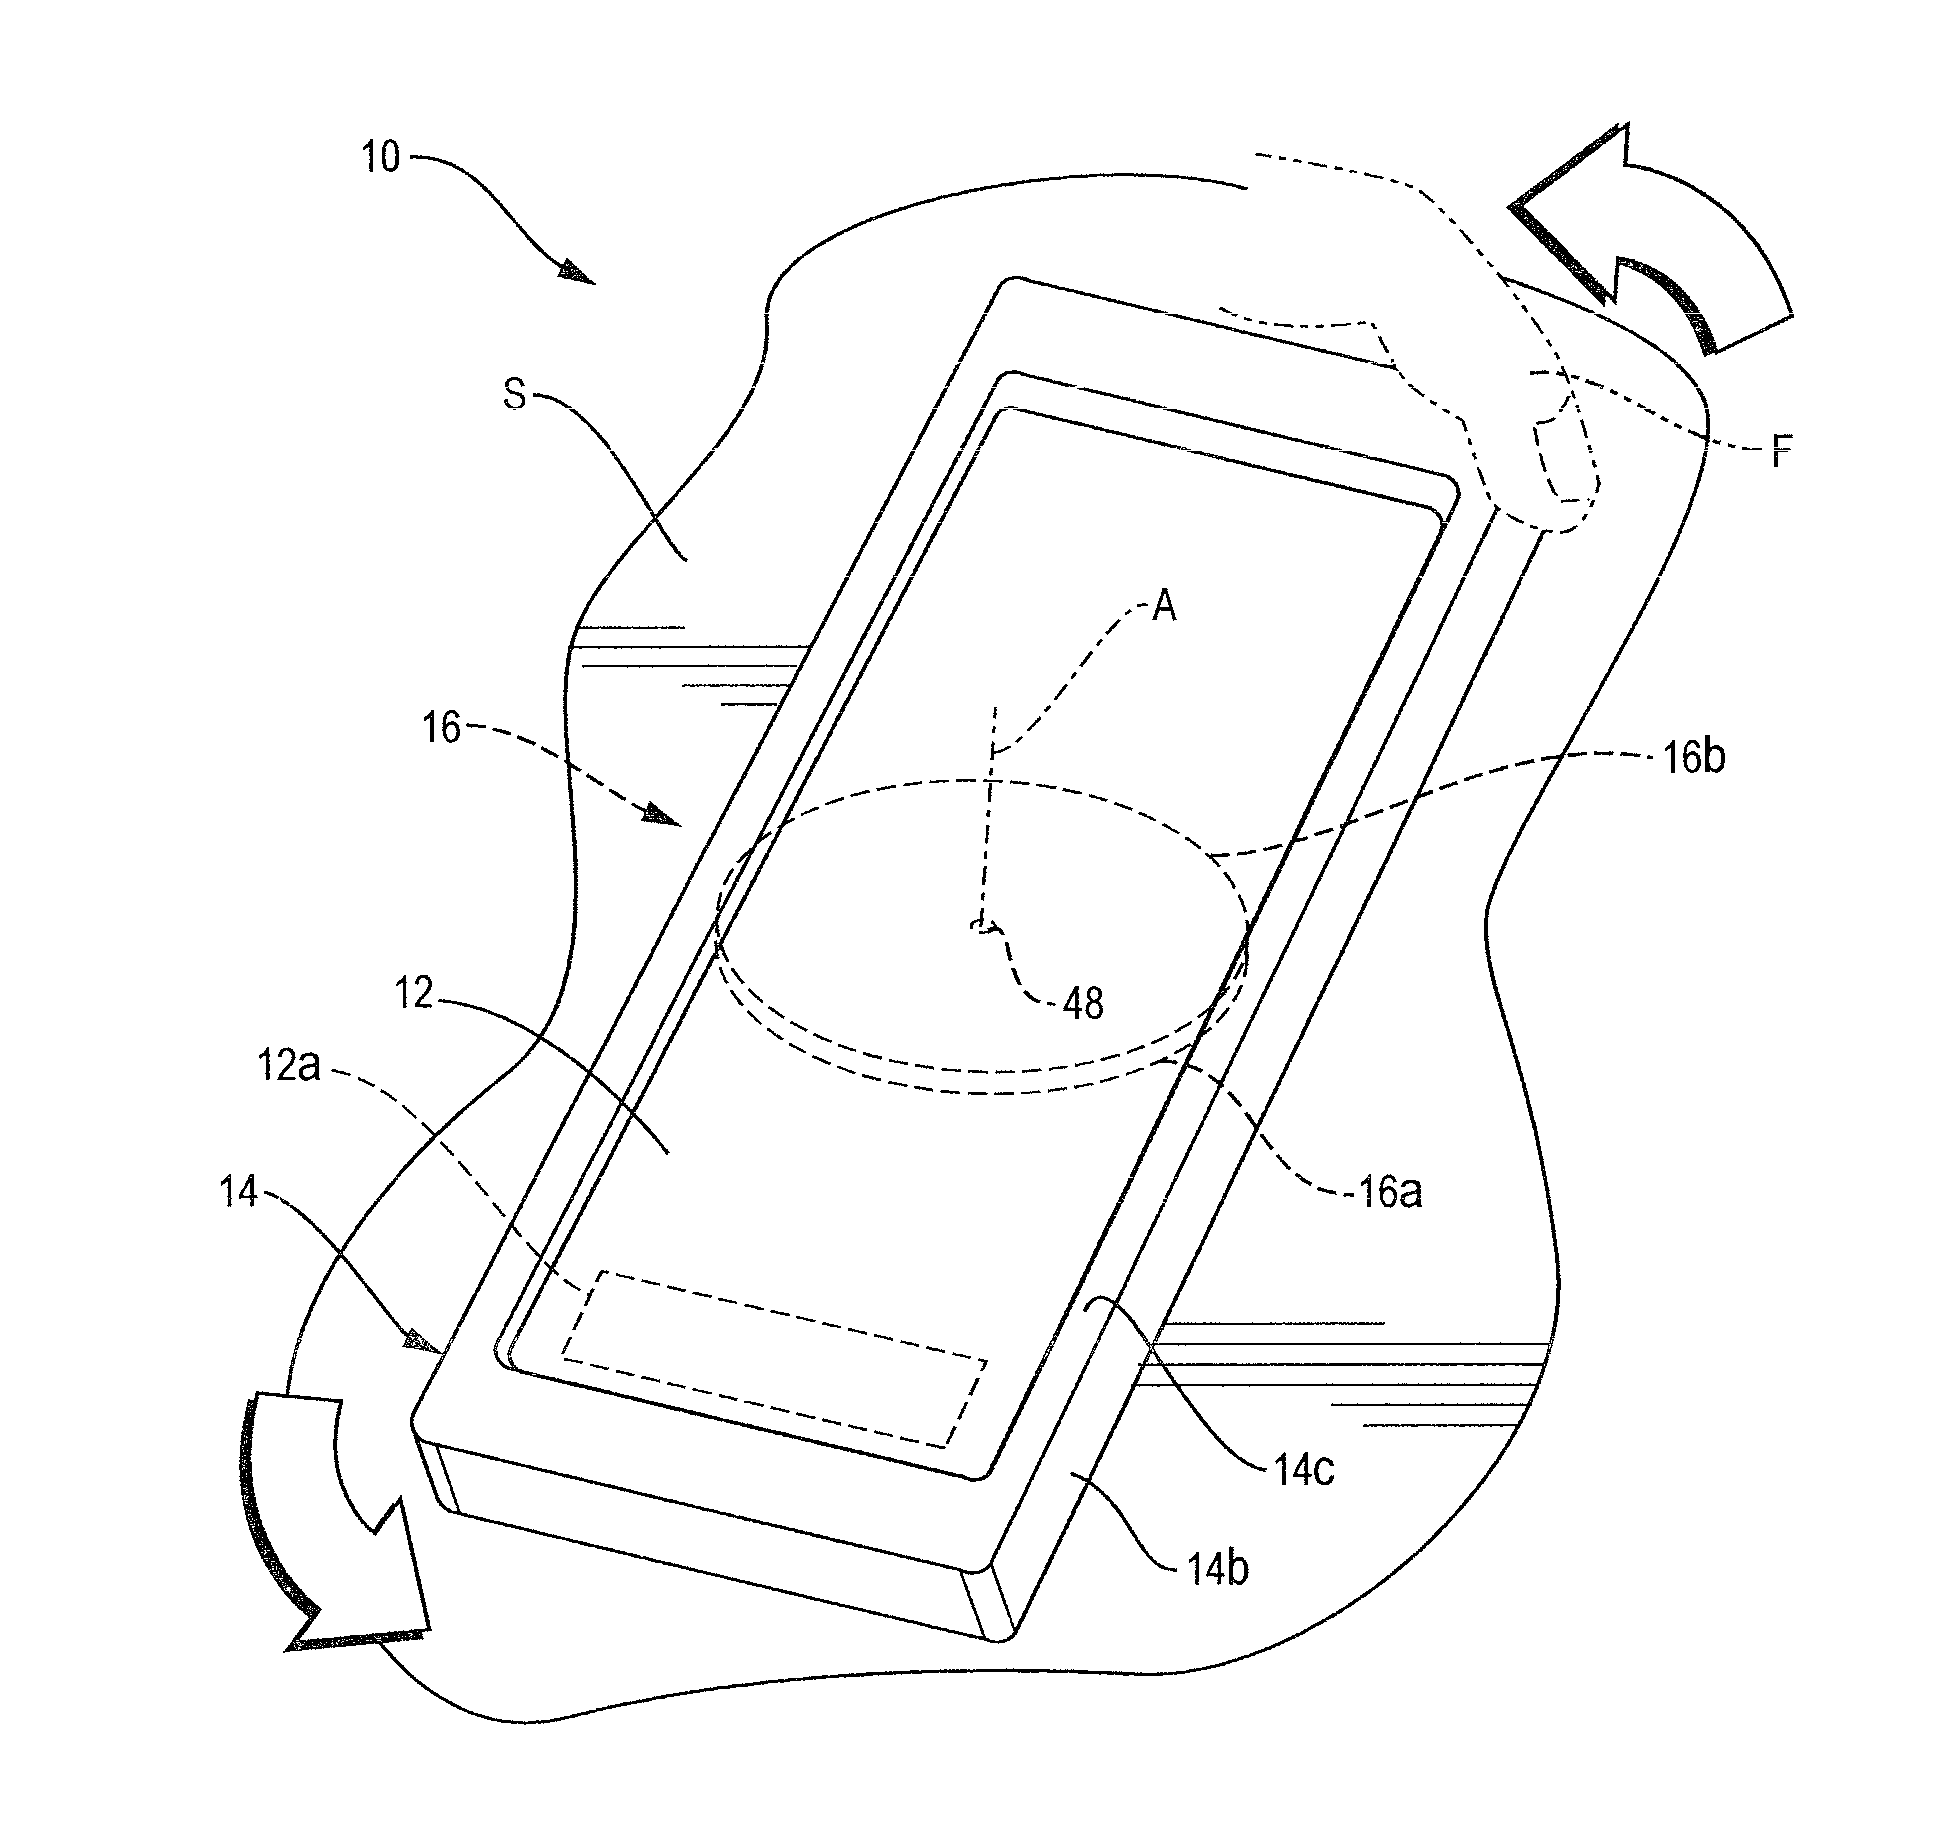 Handheld rotationally rechargeable electronic apparatus